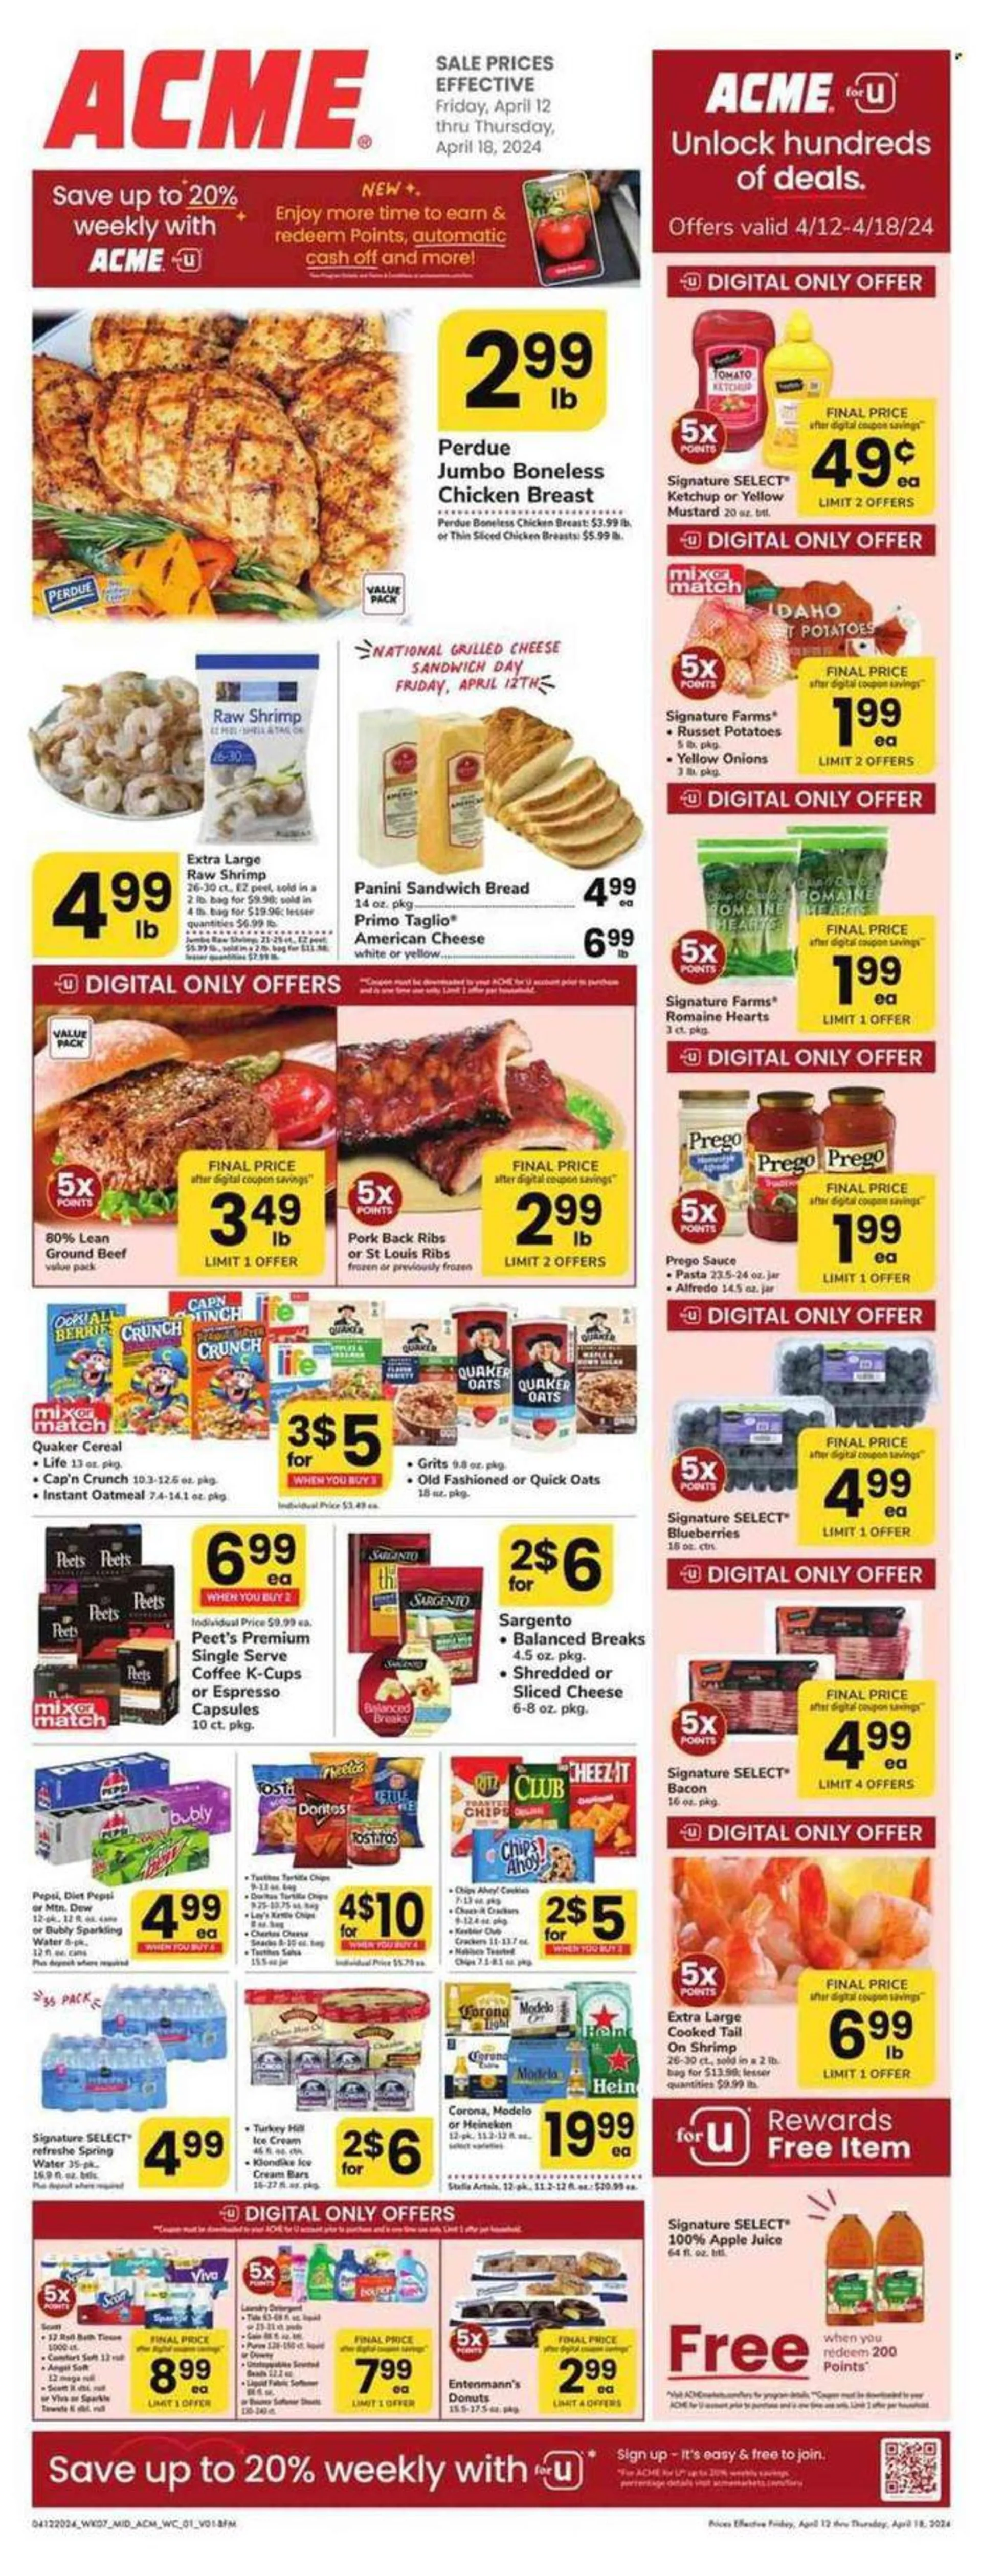 Weekly ad ACME Weekly ad 12/04 from April 12 to April 18 2024 - Page 